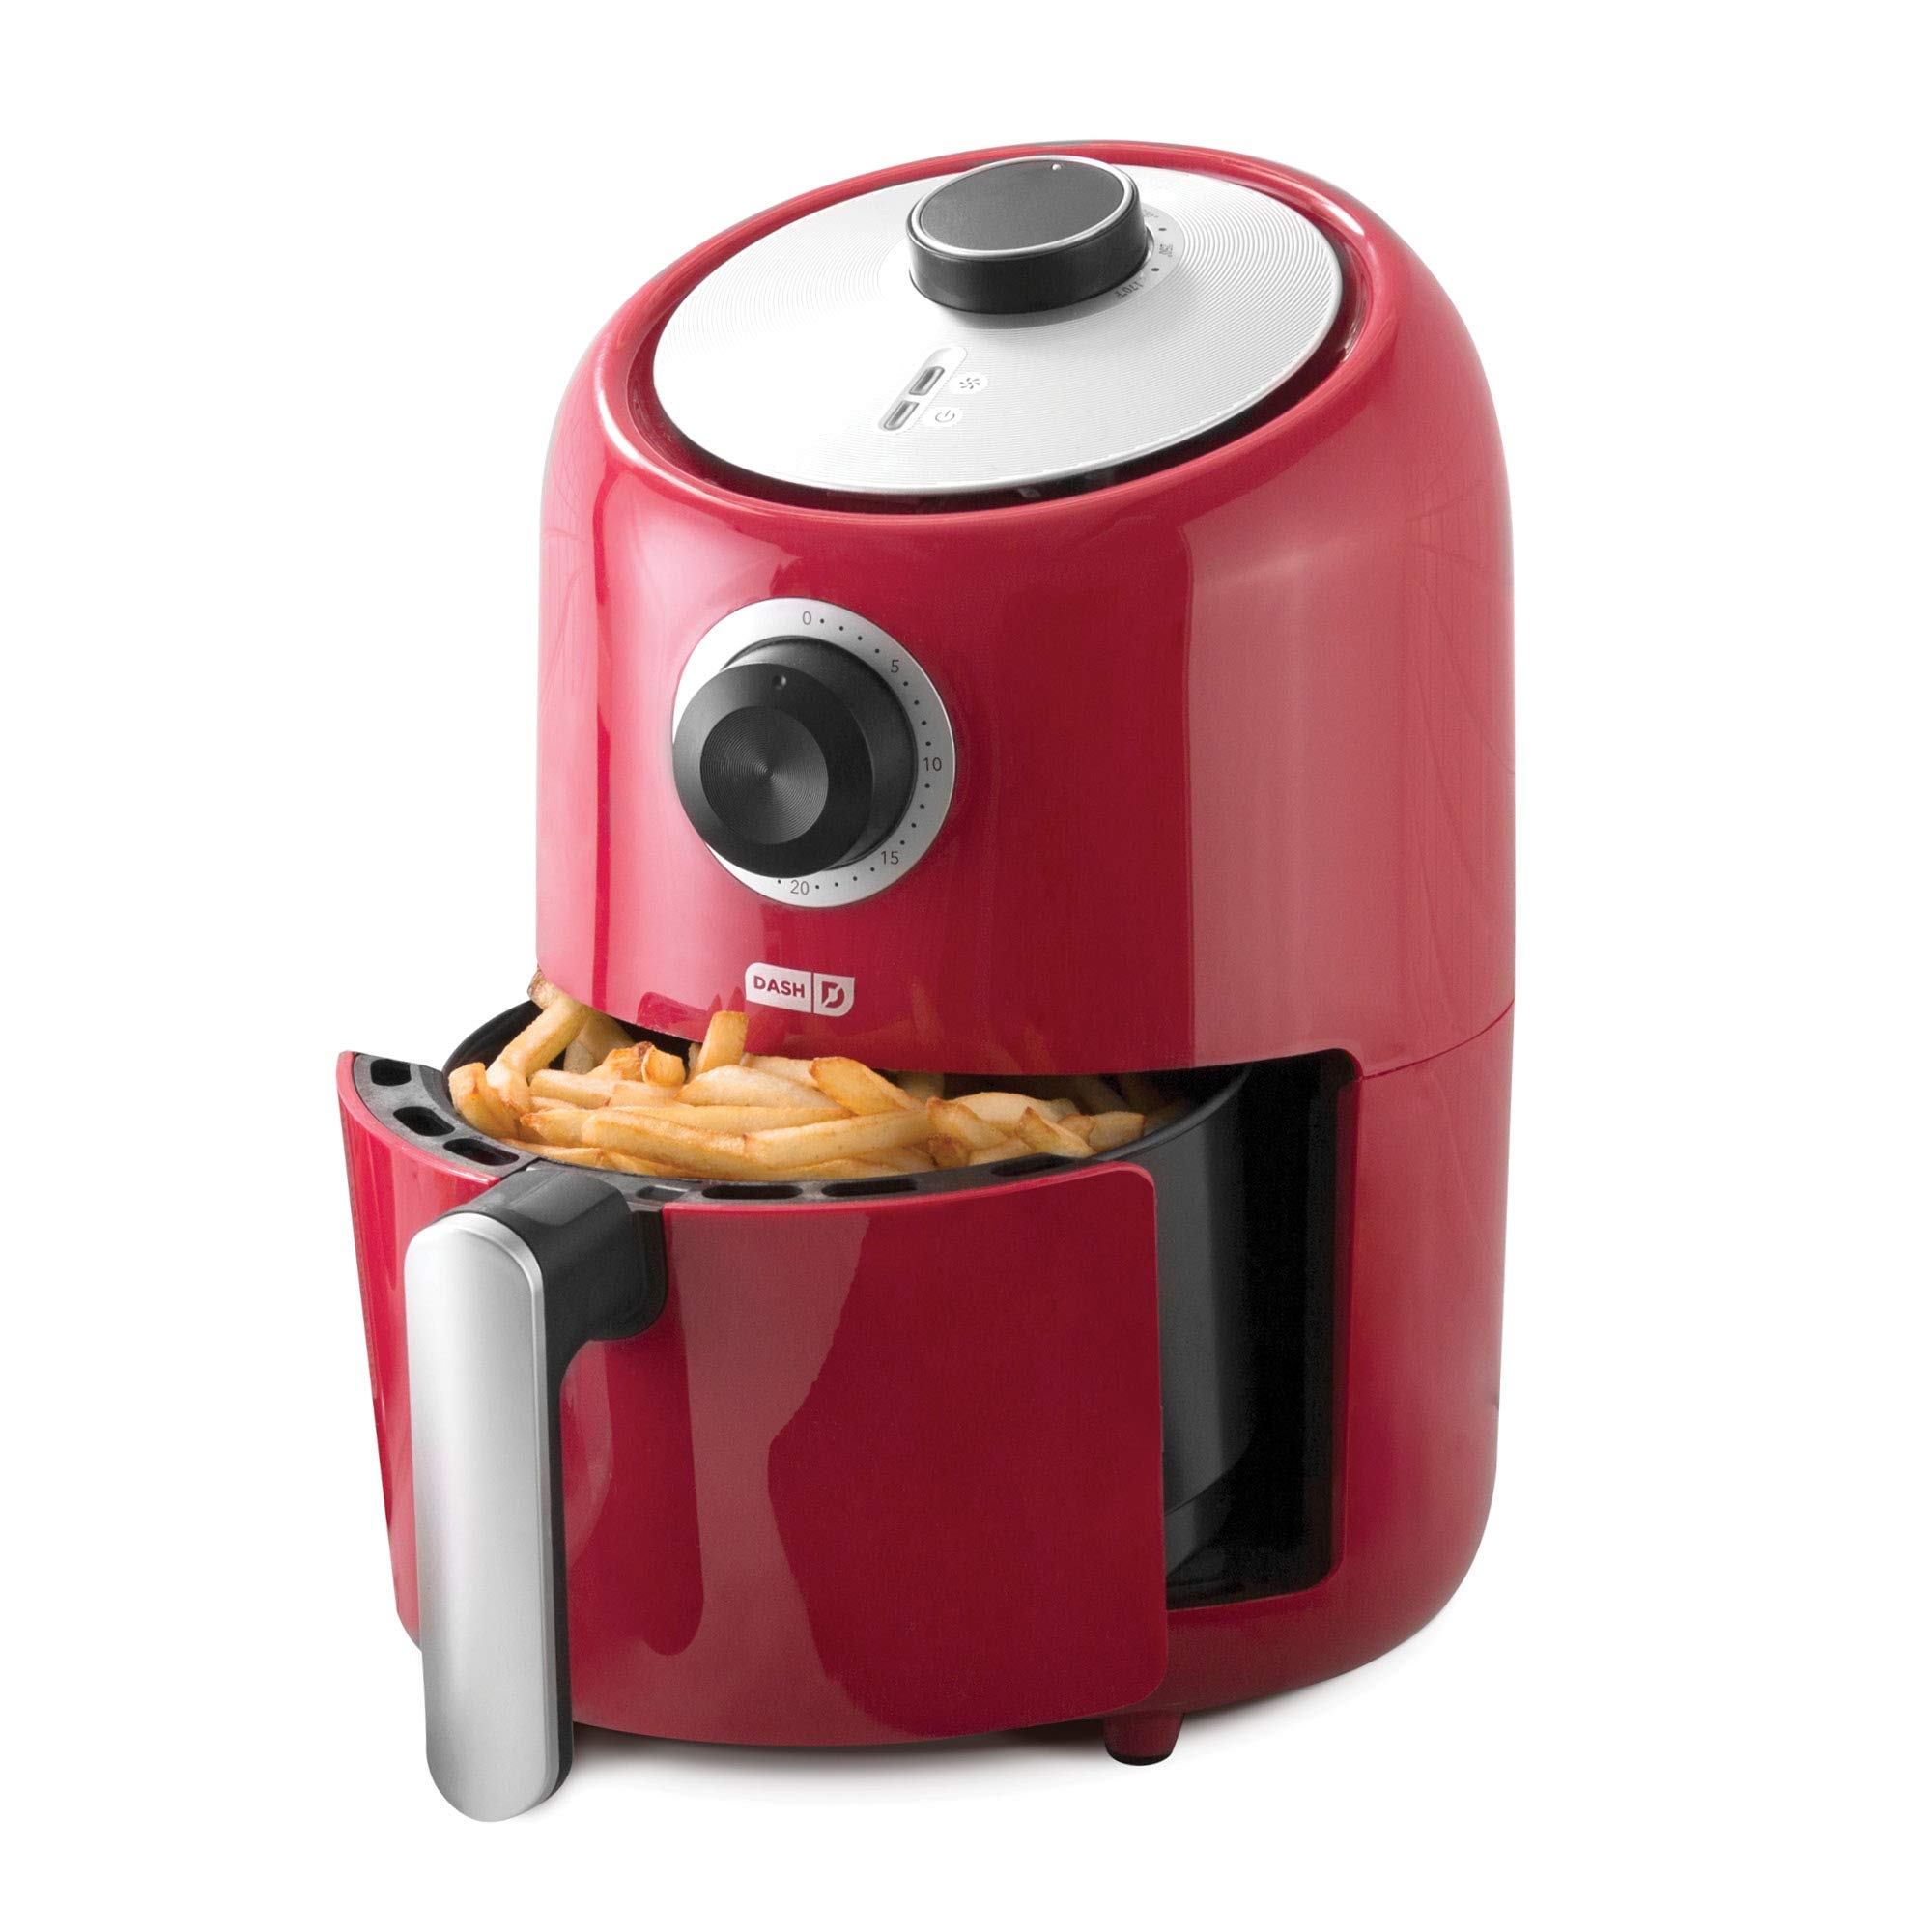 DASH Compact Air Fryer Oven Cooker